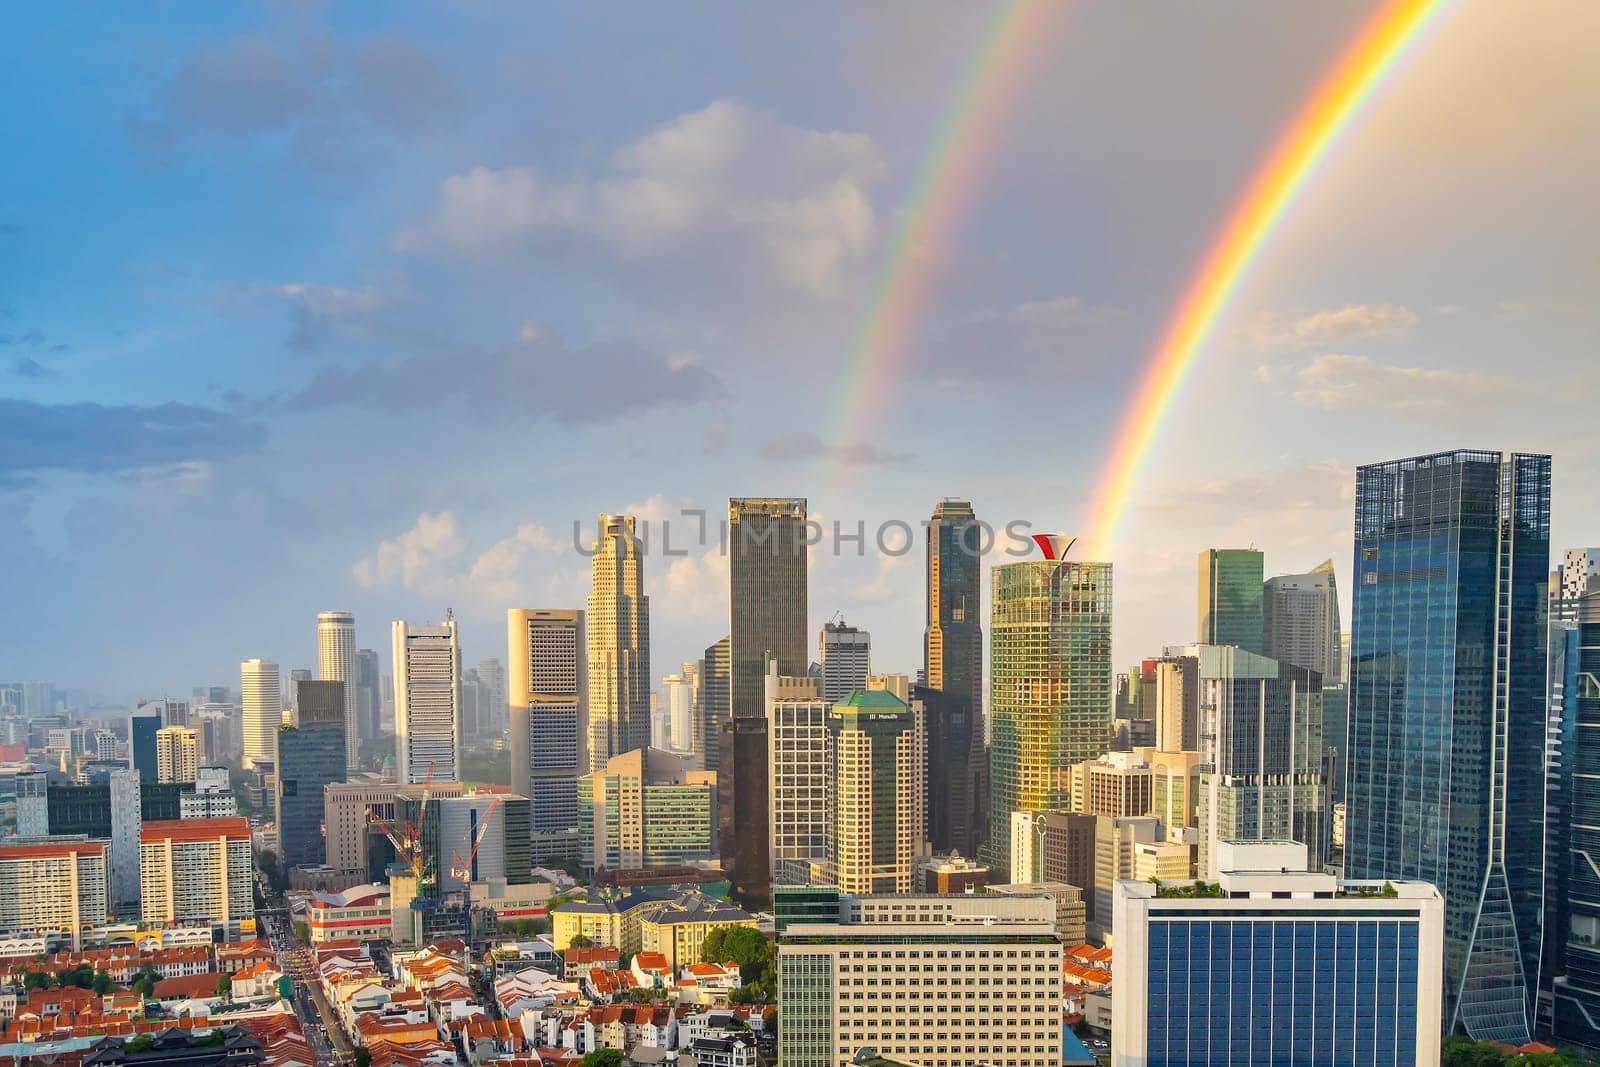 Downtown city skyline, cityscape of Singapore with rainbow